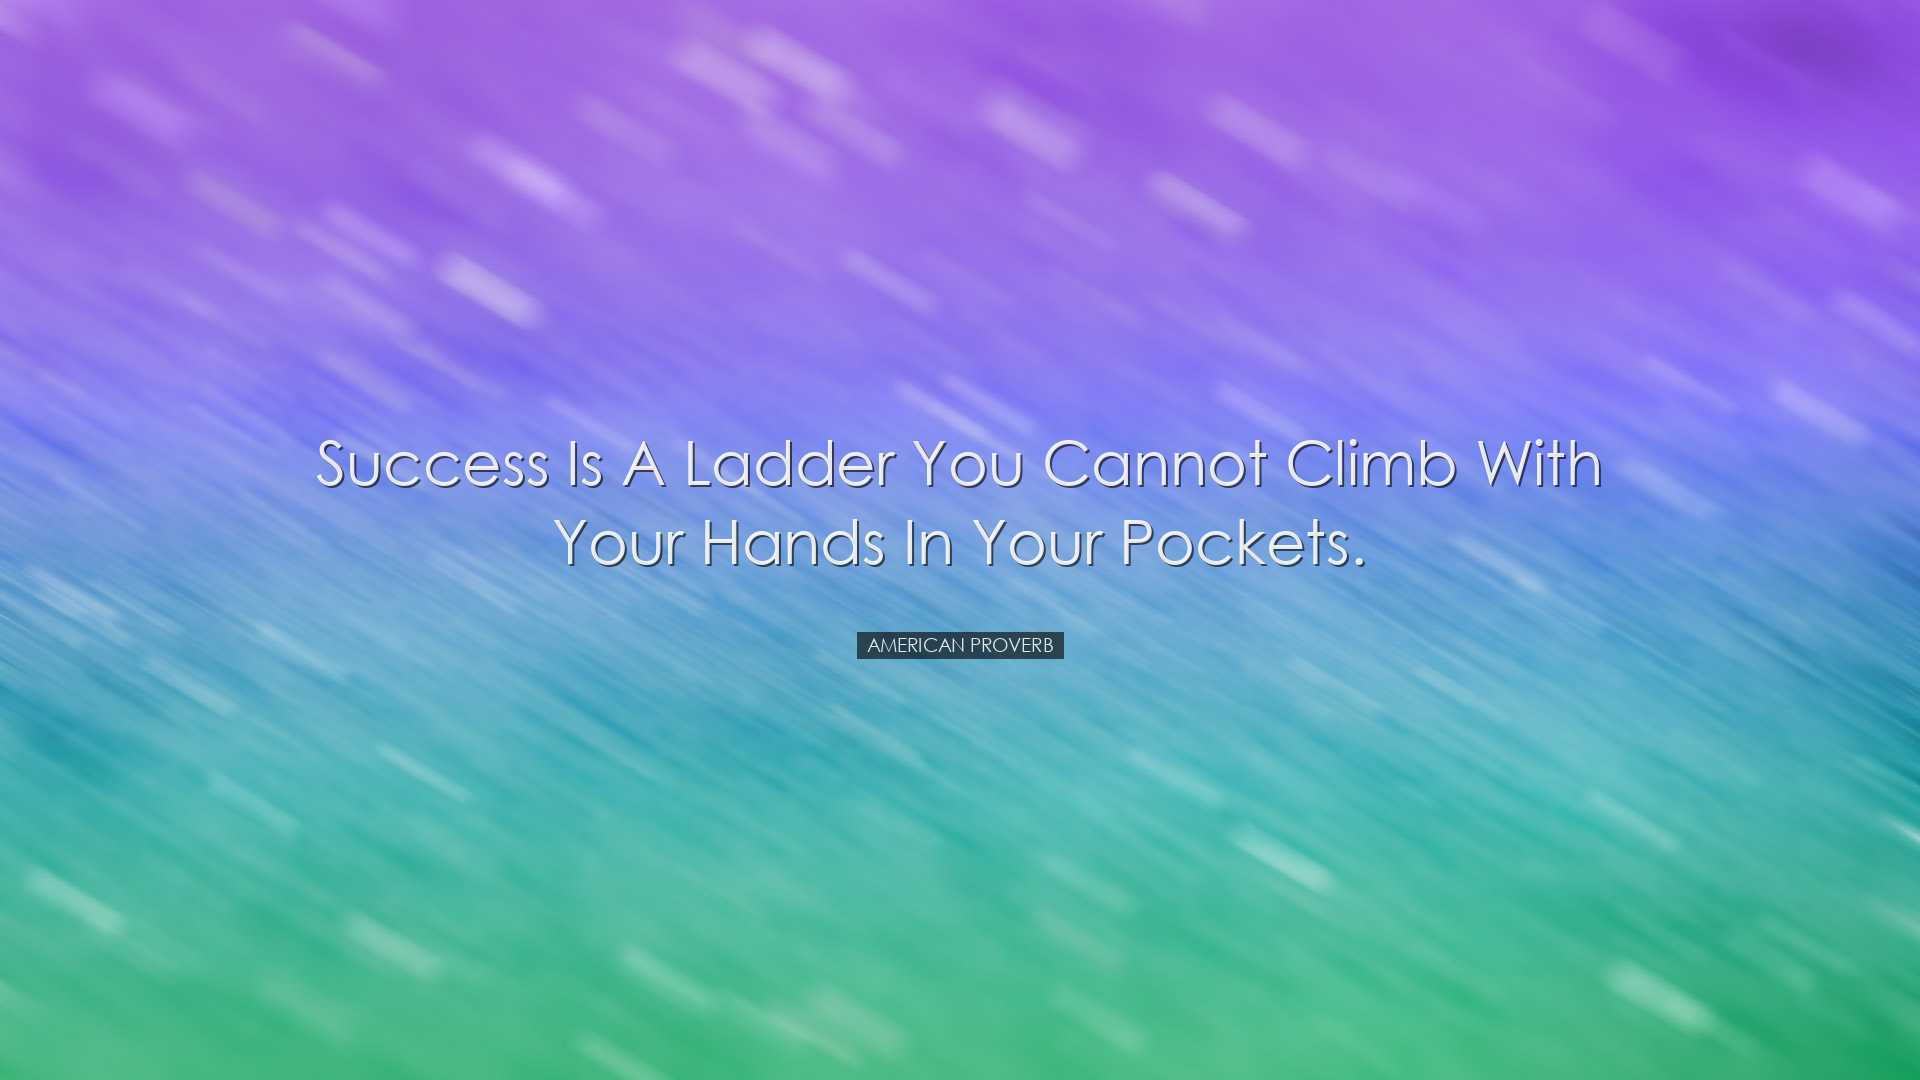 Success is a ladder you cannot climb with your hands in your pocke